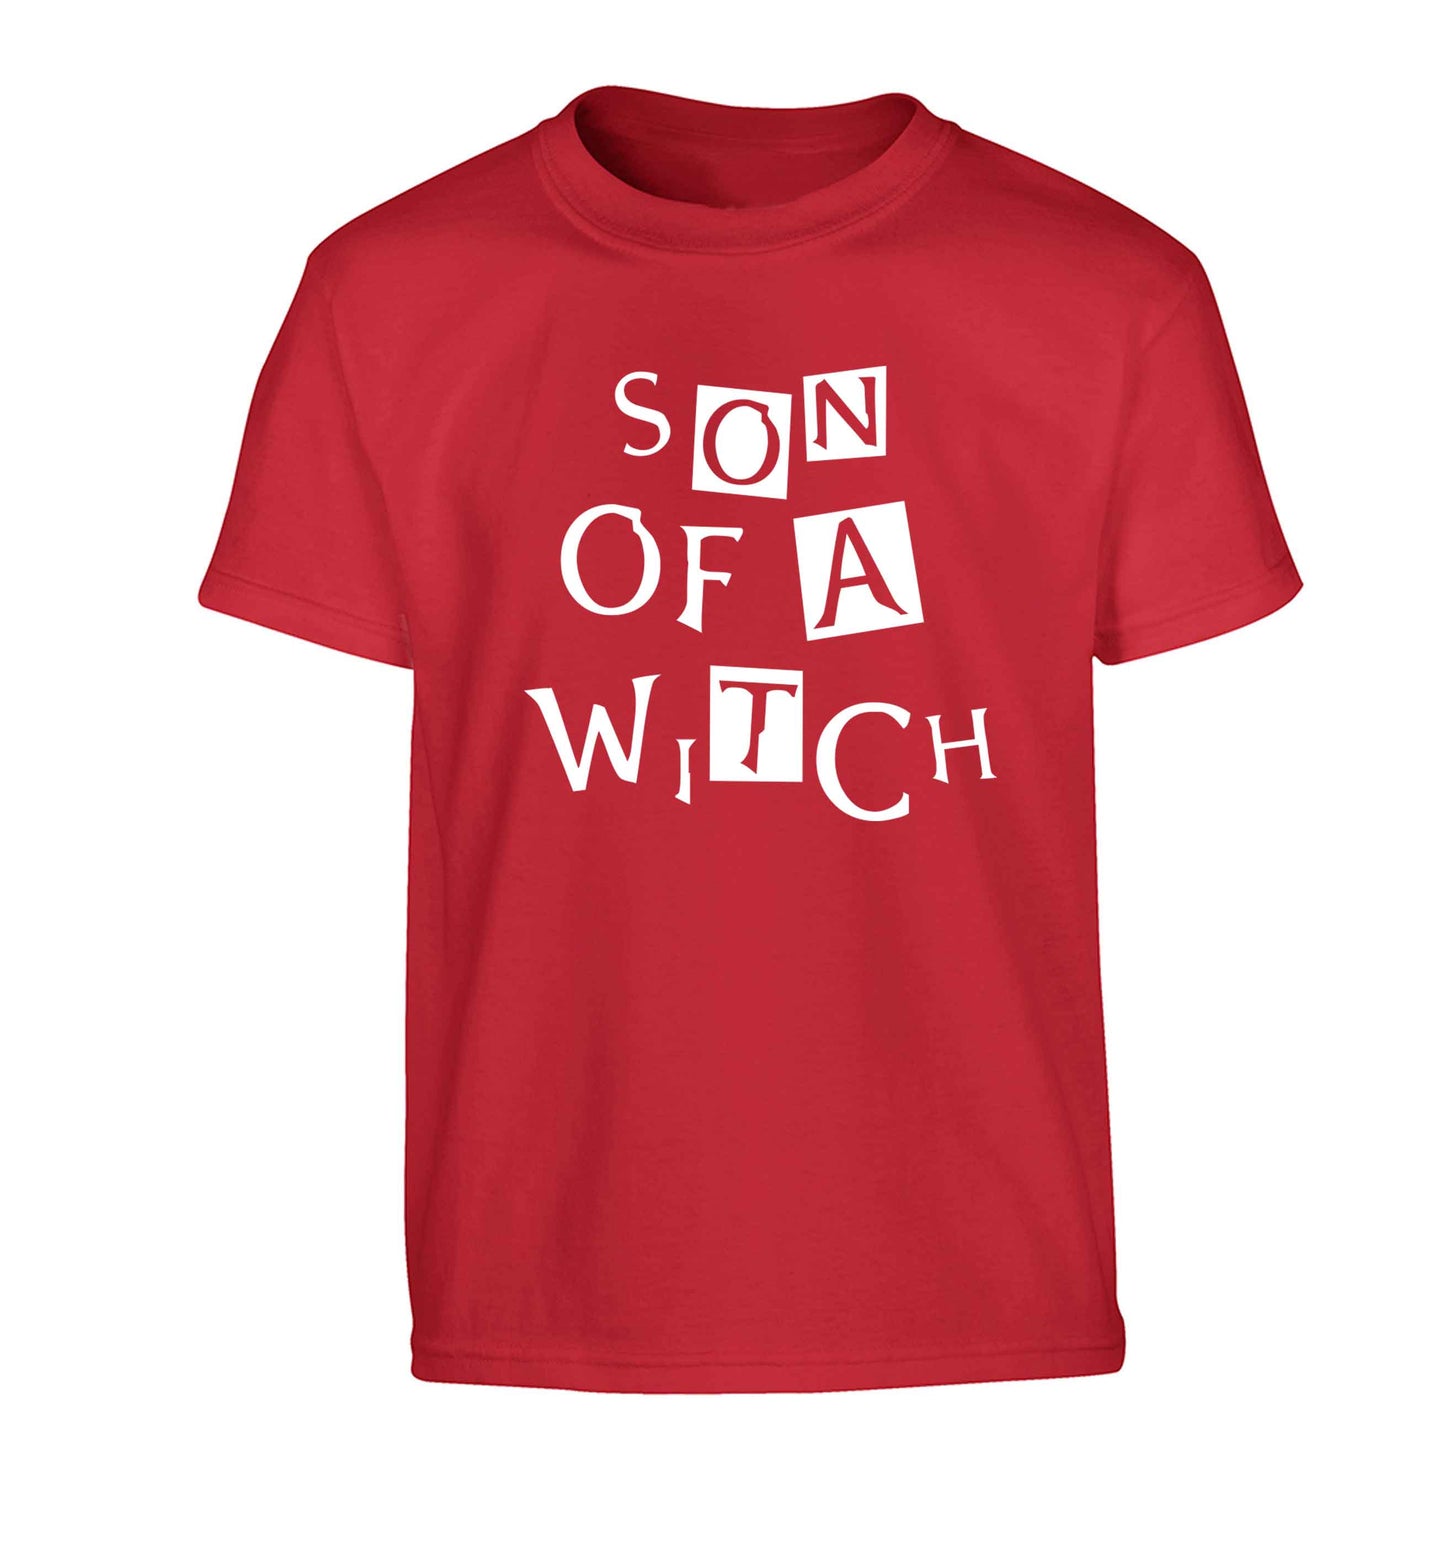 Son of a witch Children's red Tshirt 12-13 Years